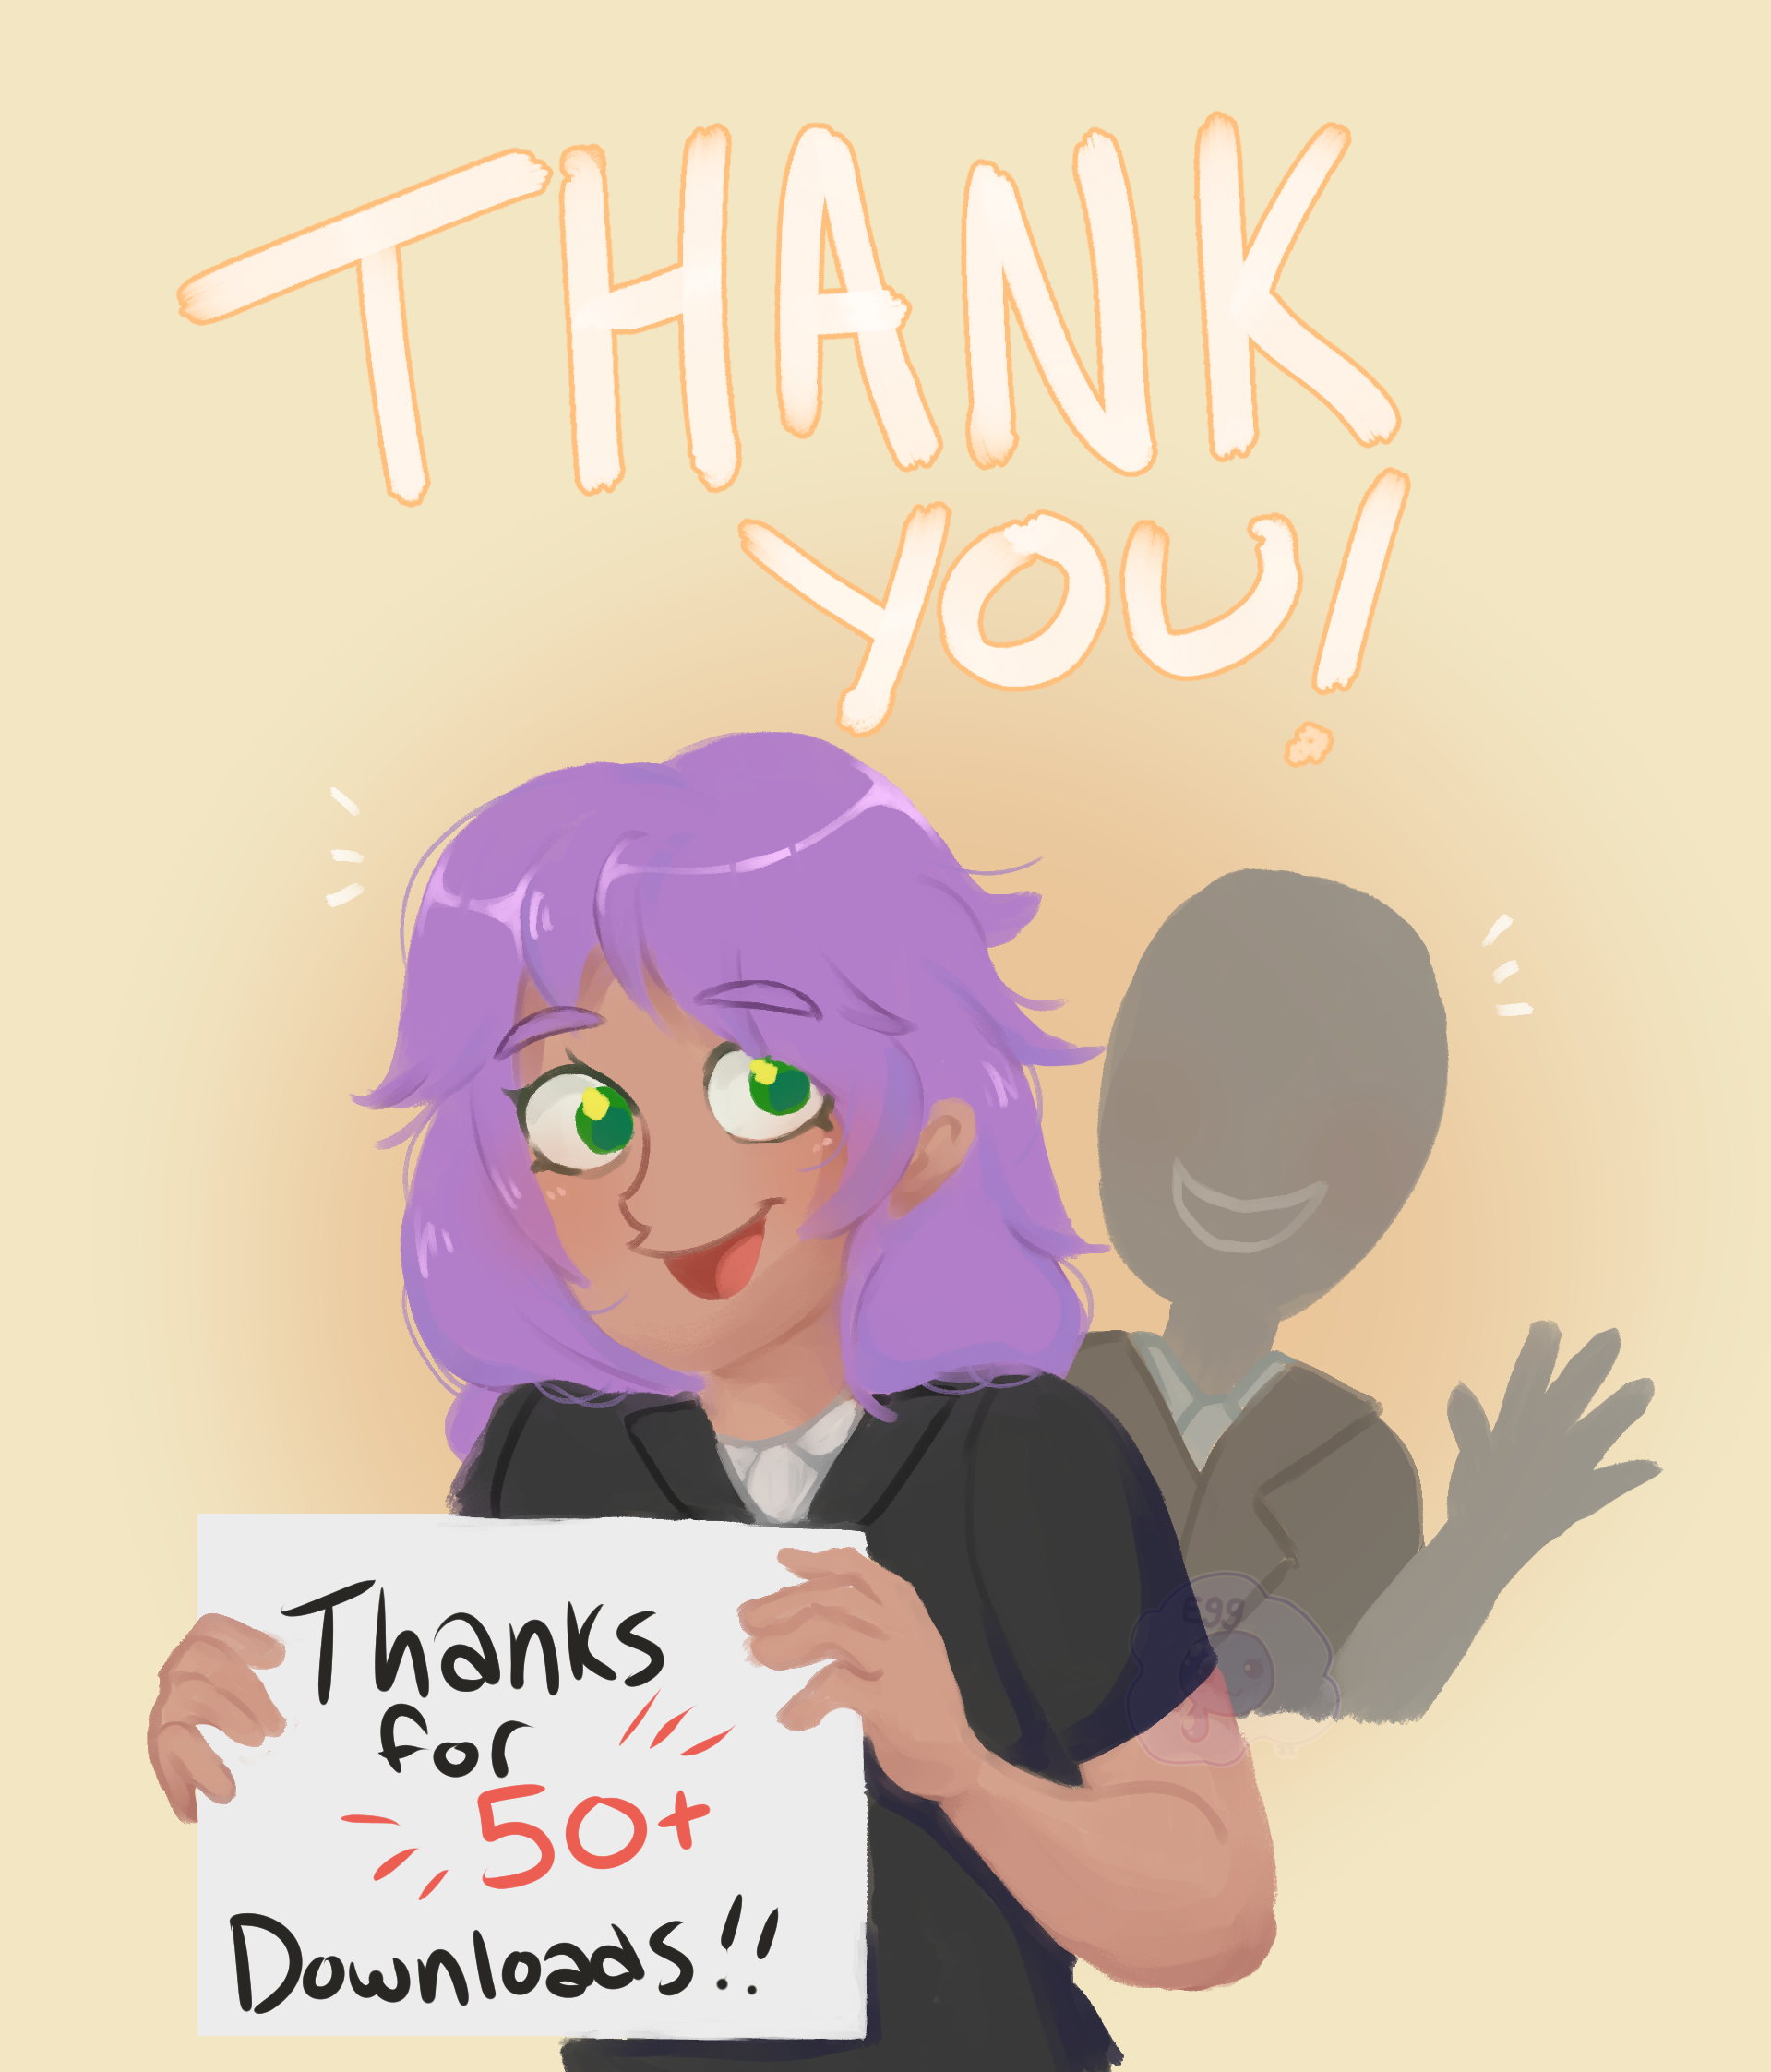 Thank you for 50+ Downloads on Itch.io!